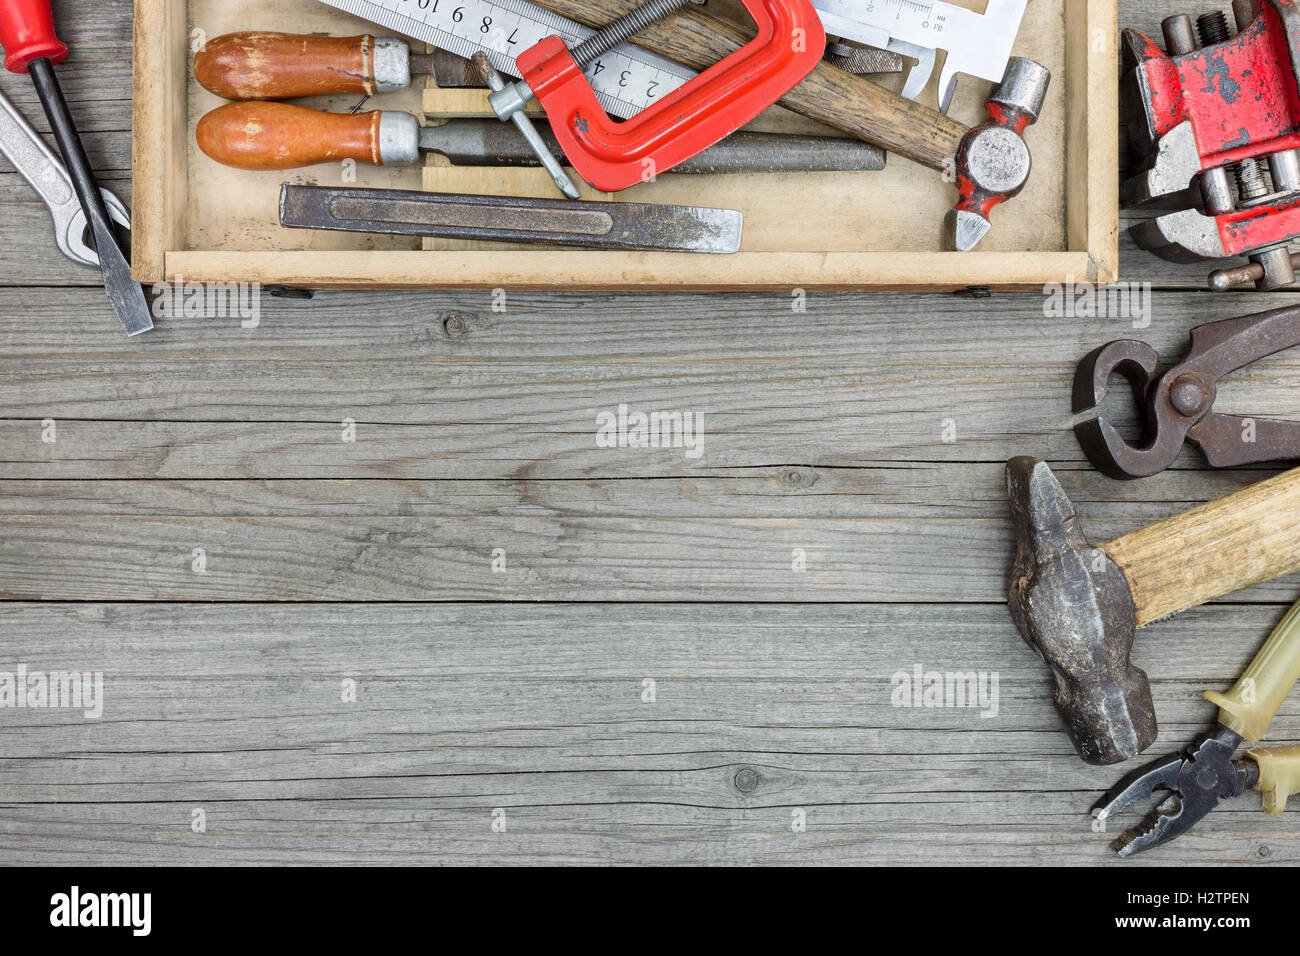 old tool set of rusty hammer, nipper, clamps wrenches and other instruments in toolbox on wooden background Stock Photo